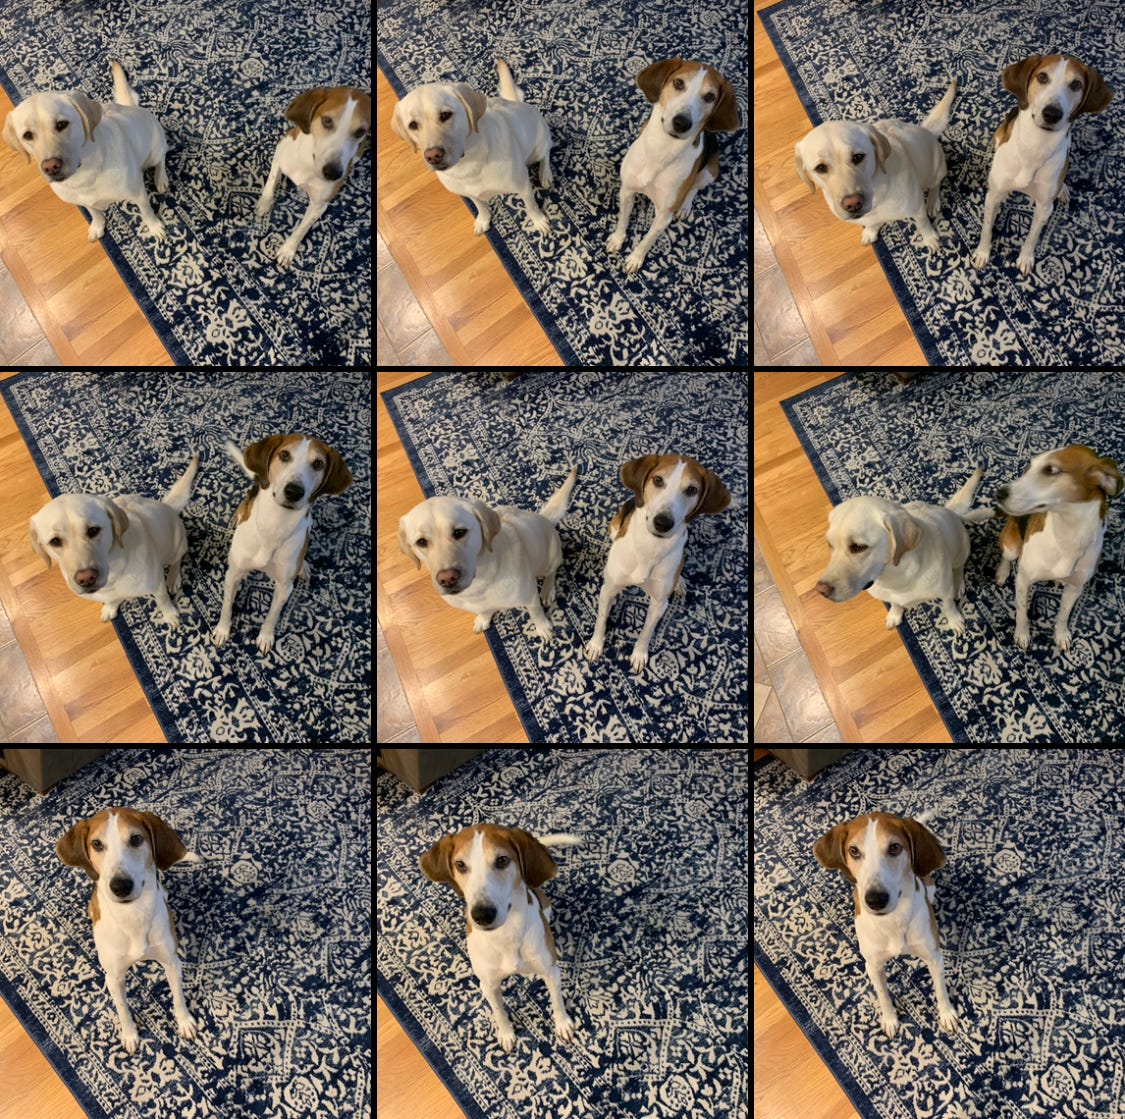 Nine photos (three rows of three) make a collage. In the first two rows, a yellow Labrador retriever and a brown, black and white American Foxhound pose for photos while sitting on a blue and white rug. Sometimes they're not looking at the camera. In the third row, the Labrador retriever is gone and only the Foxhound remains.